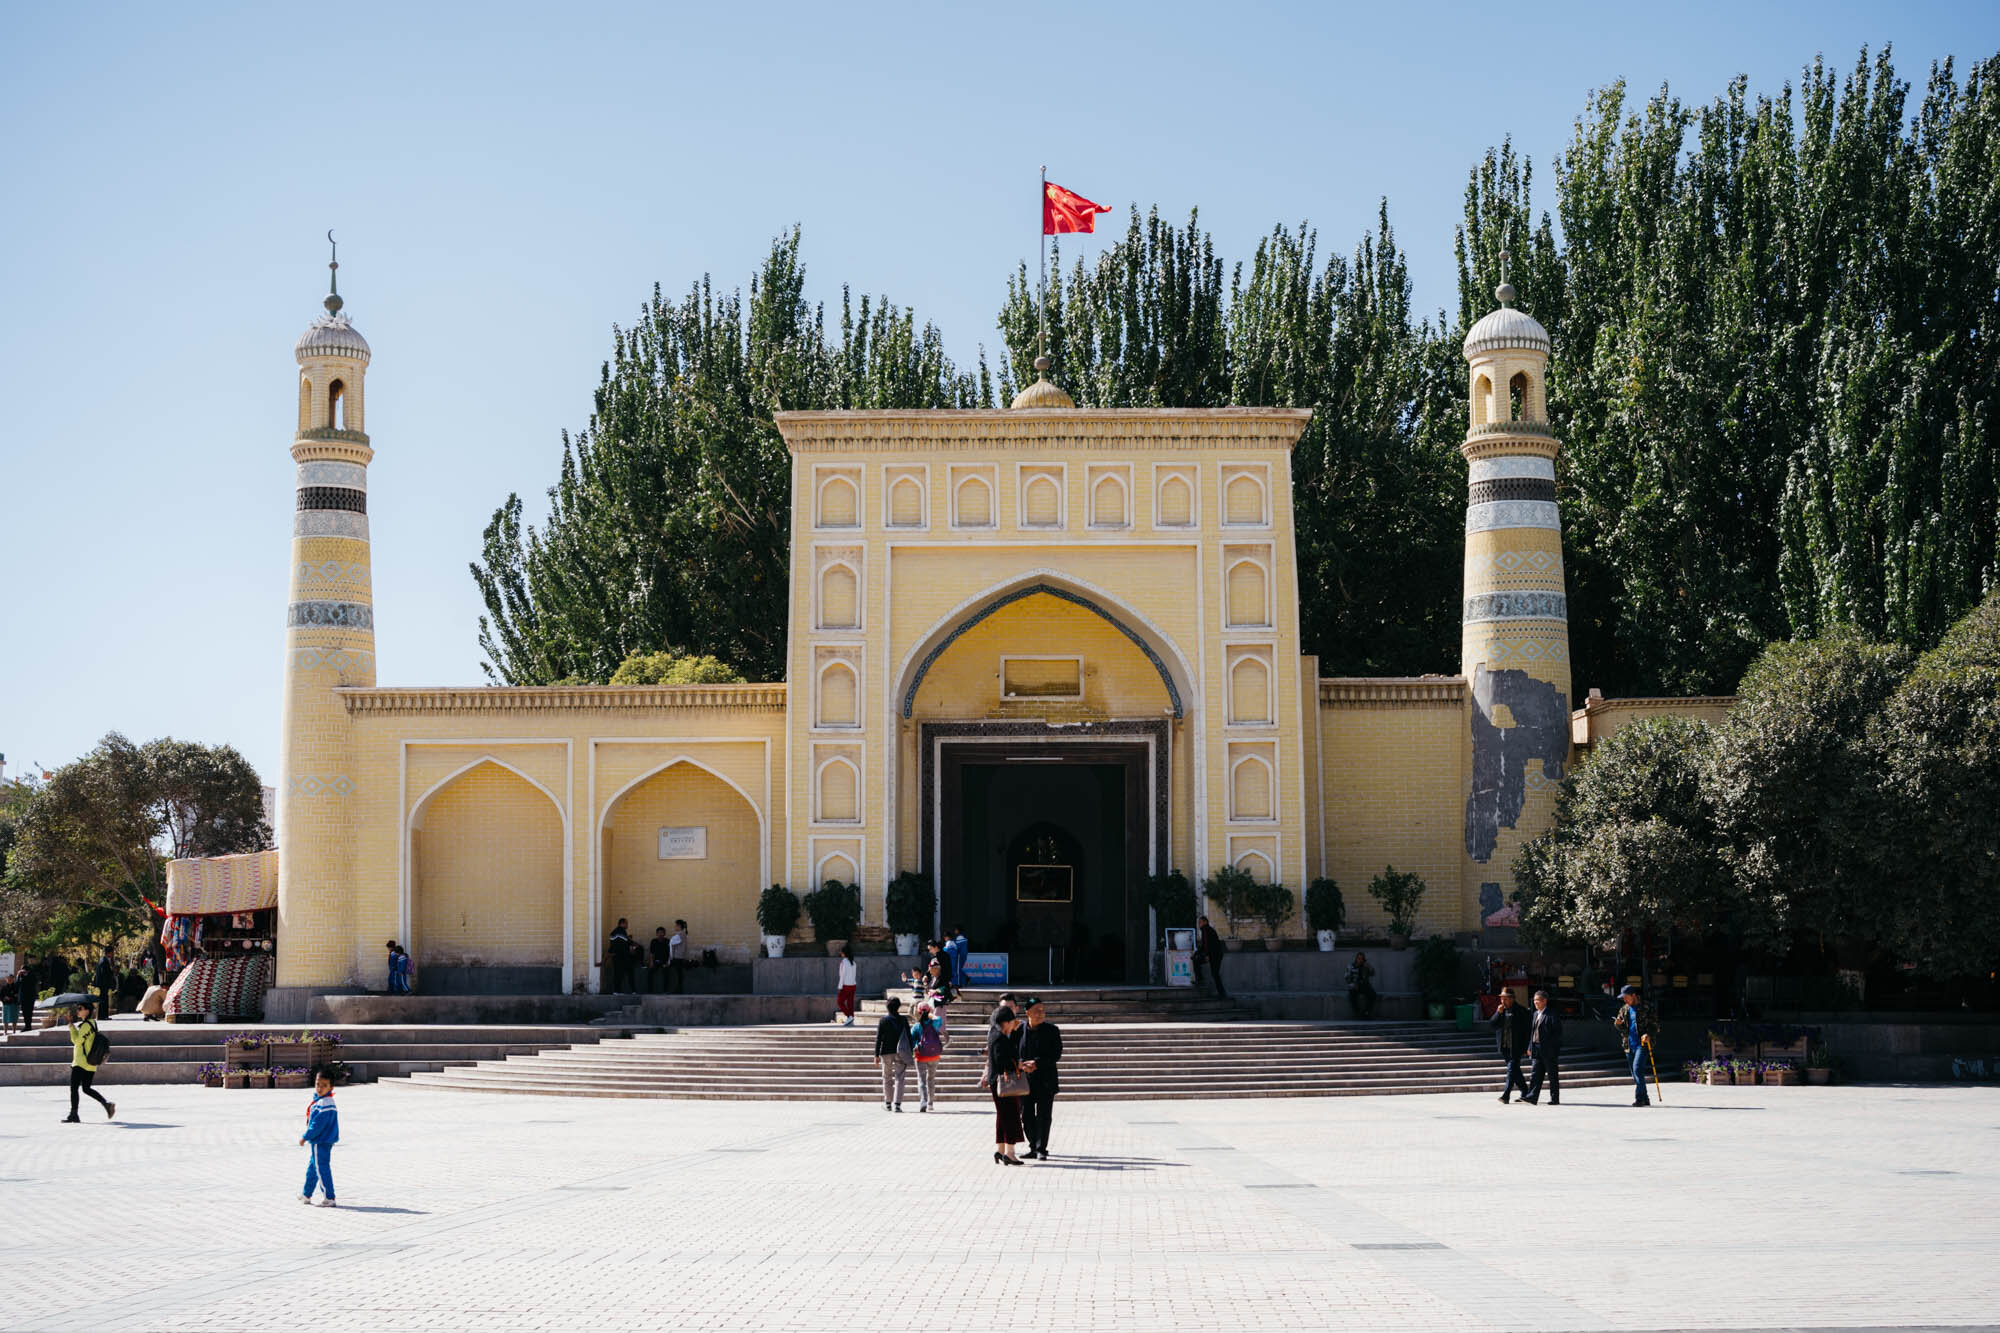  The Id Kah Mosque, the largest mosque in China. Every Friday, it houses nearly 10,000 worshippers and may accommodate up to 20,000.The mosque was built by Saqsiz Mirza in 1442 (although it incorporated older structures dating back to 996) and covers